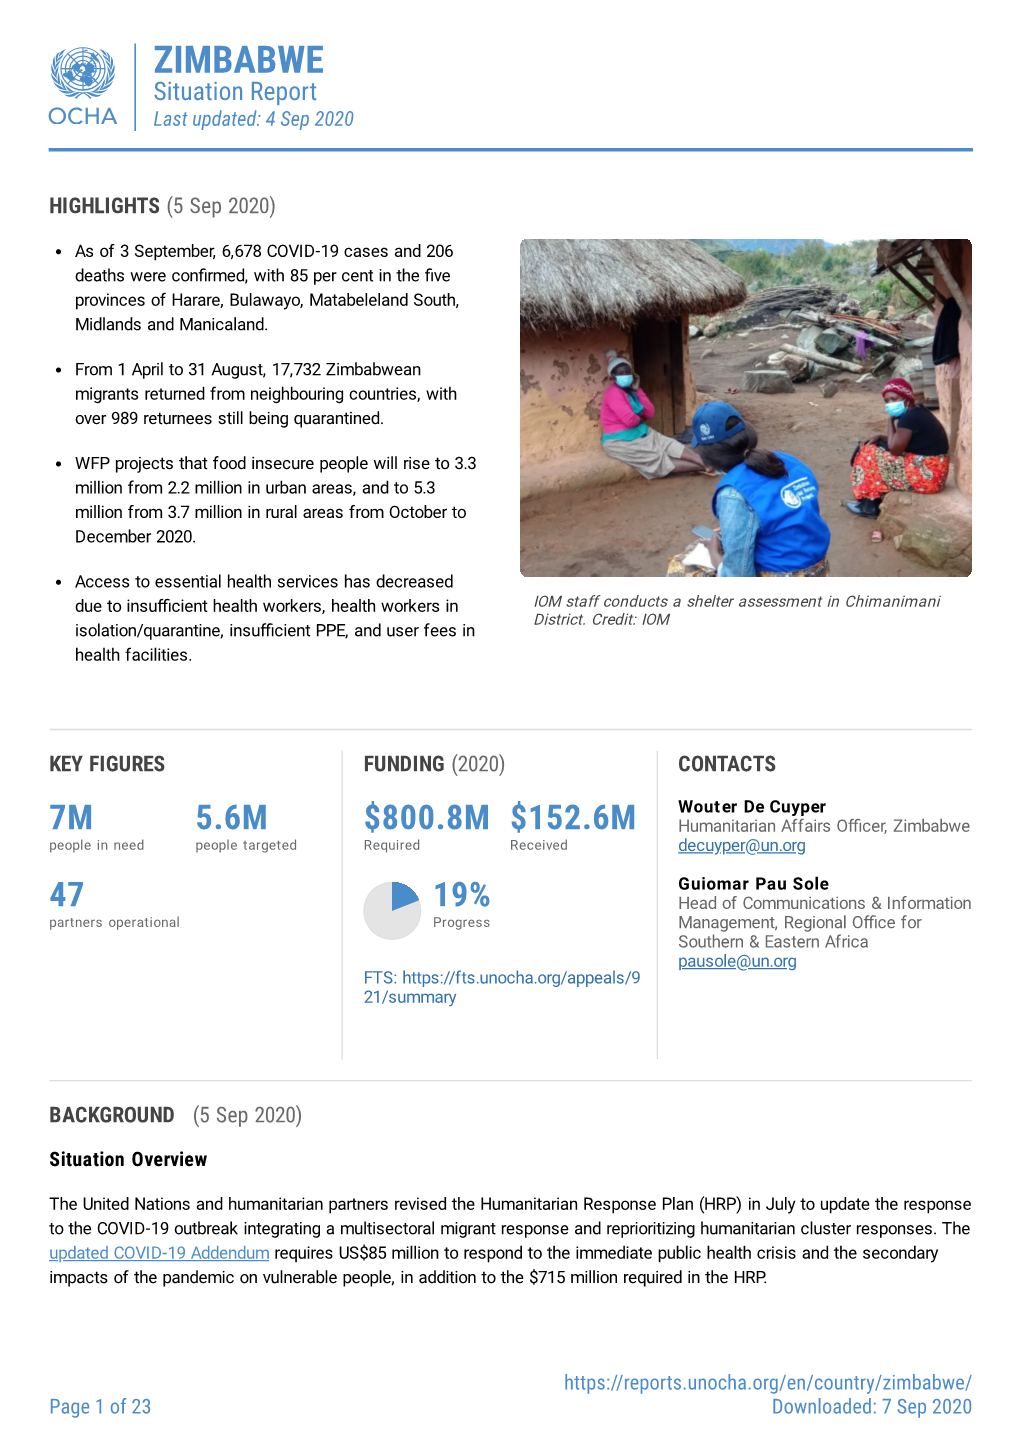 ZIMBABWE Situation Report Last Updated: 4 Sep 2020